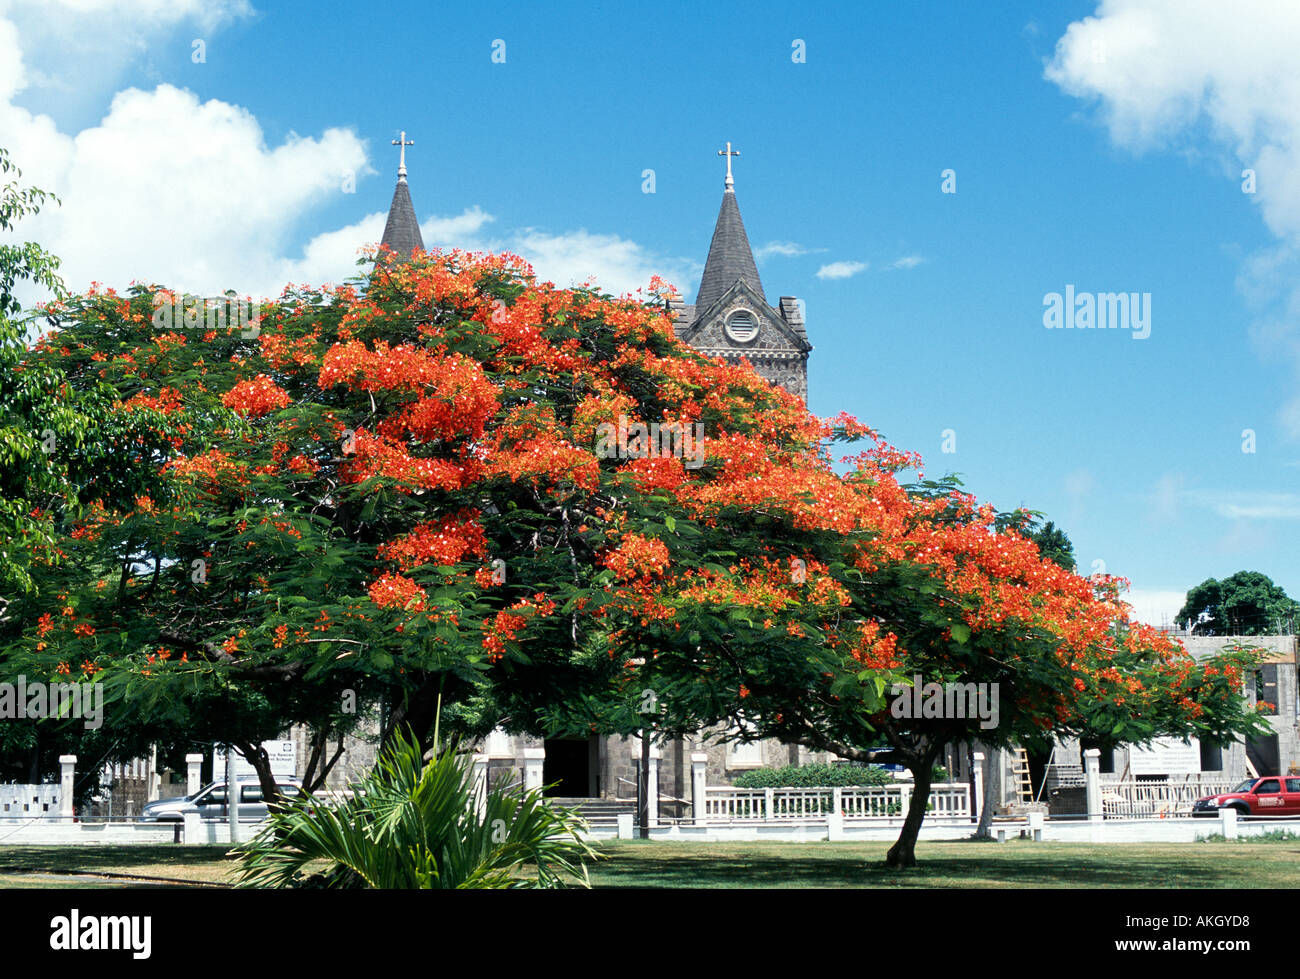 Flamboyant tree with its stunning red flowers St Kitts Caribbean Stock Photo